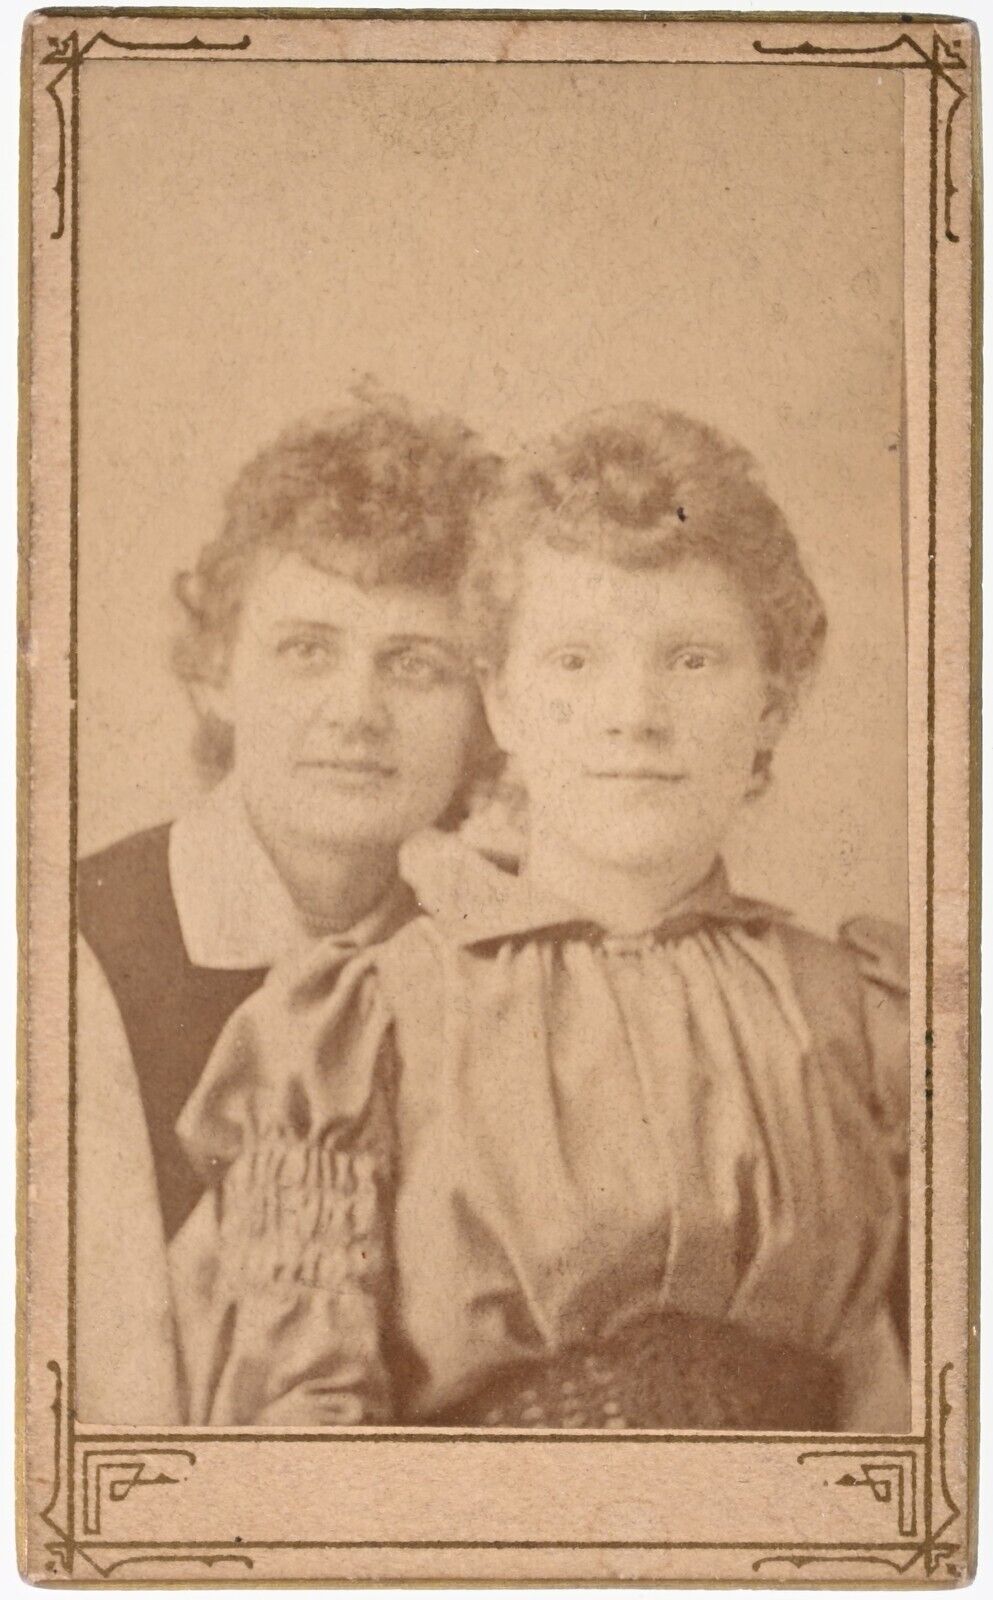 ANTIQUE SMALL WALLET PHOTO CDV C. 1890s TWO GORGEOUS YOUNG LADIES GAY INTEREST